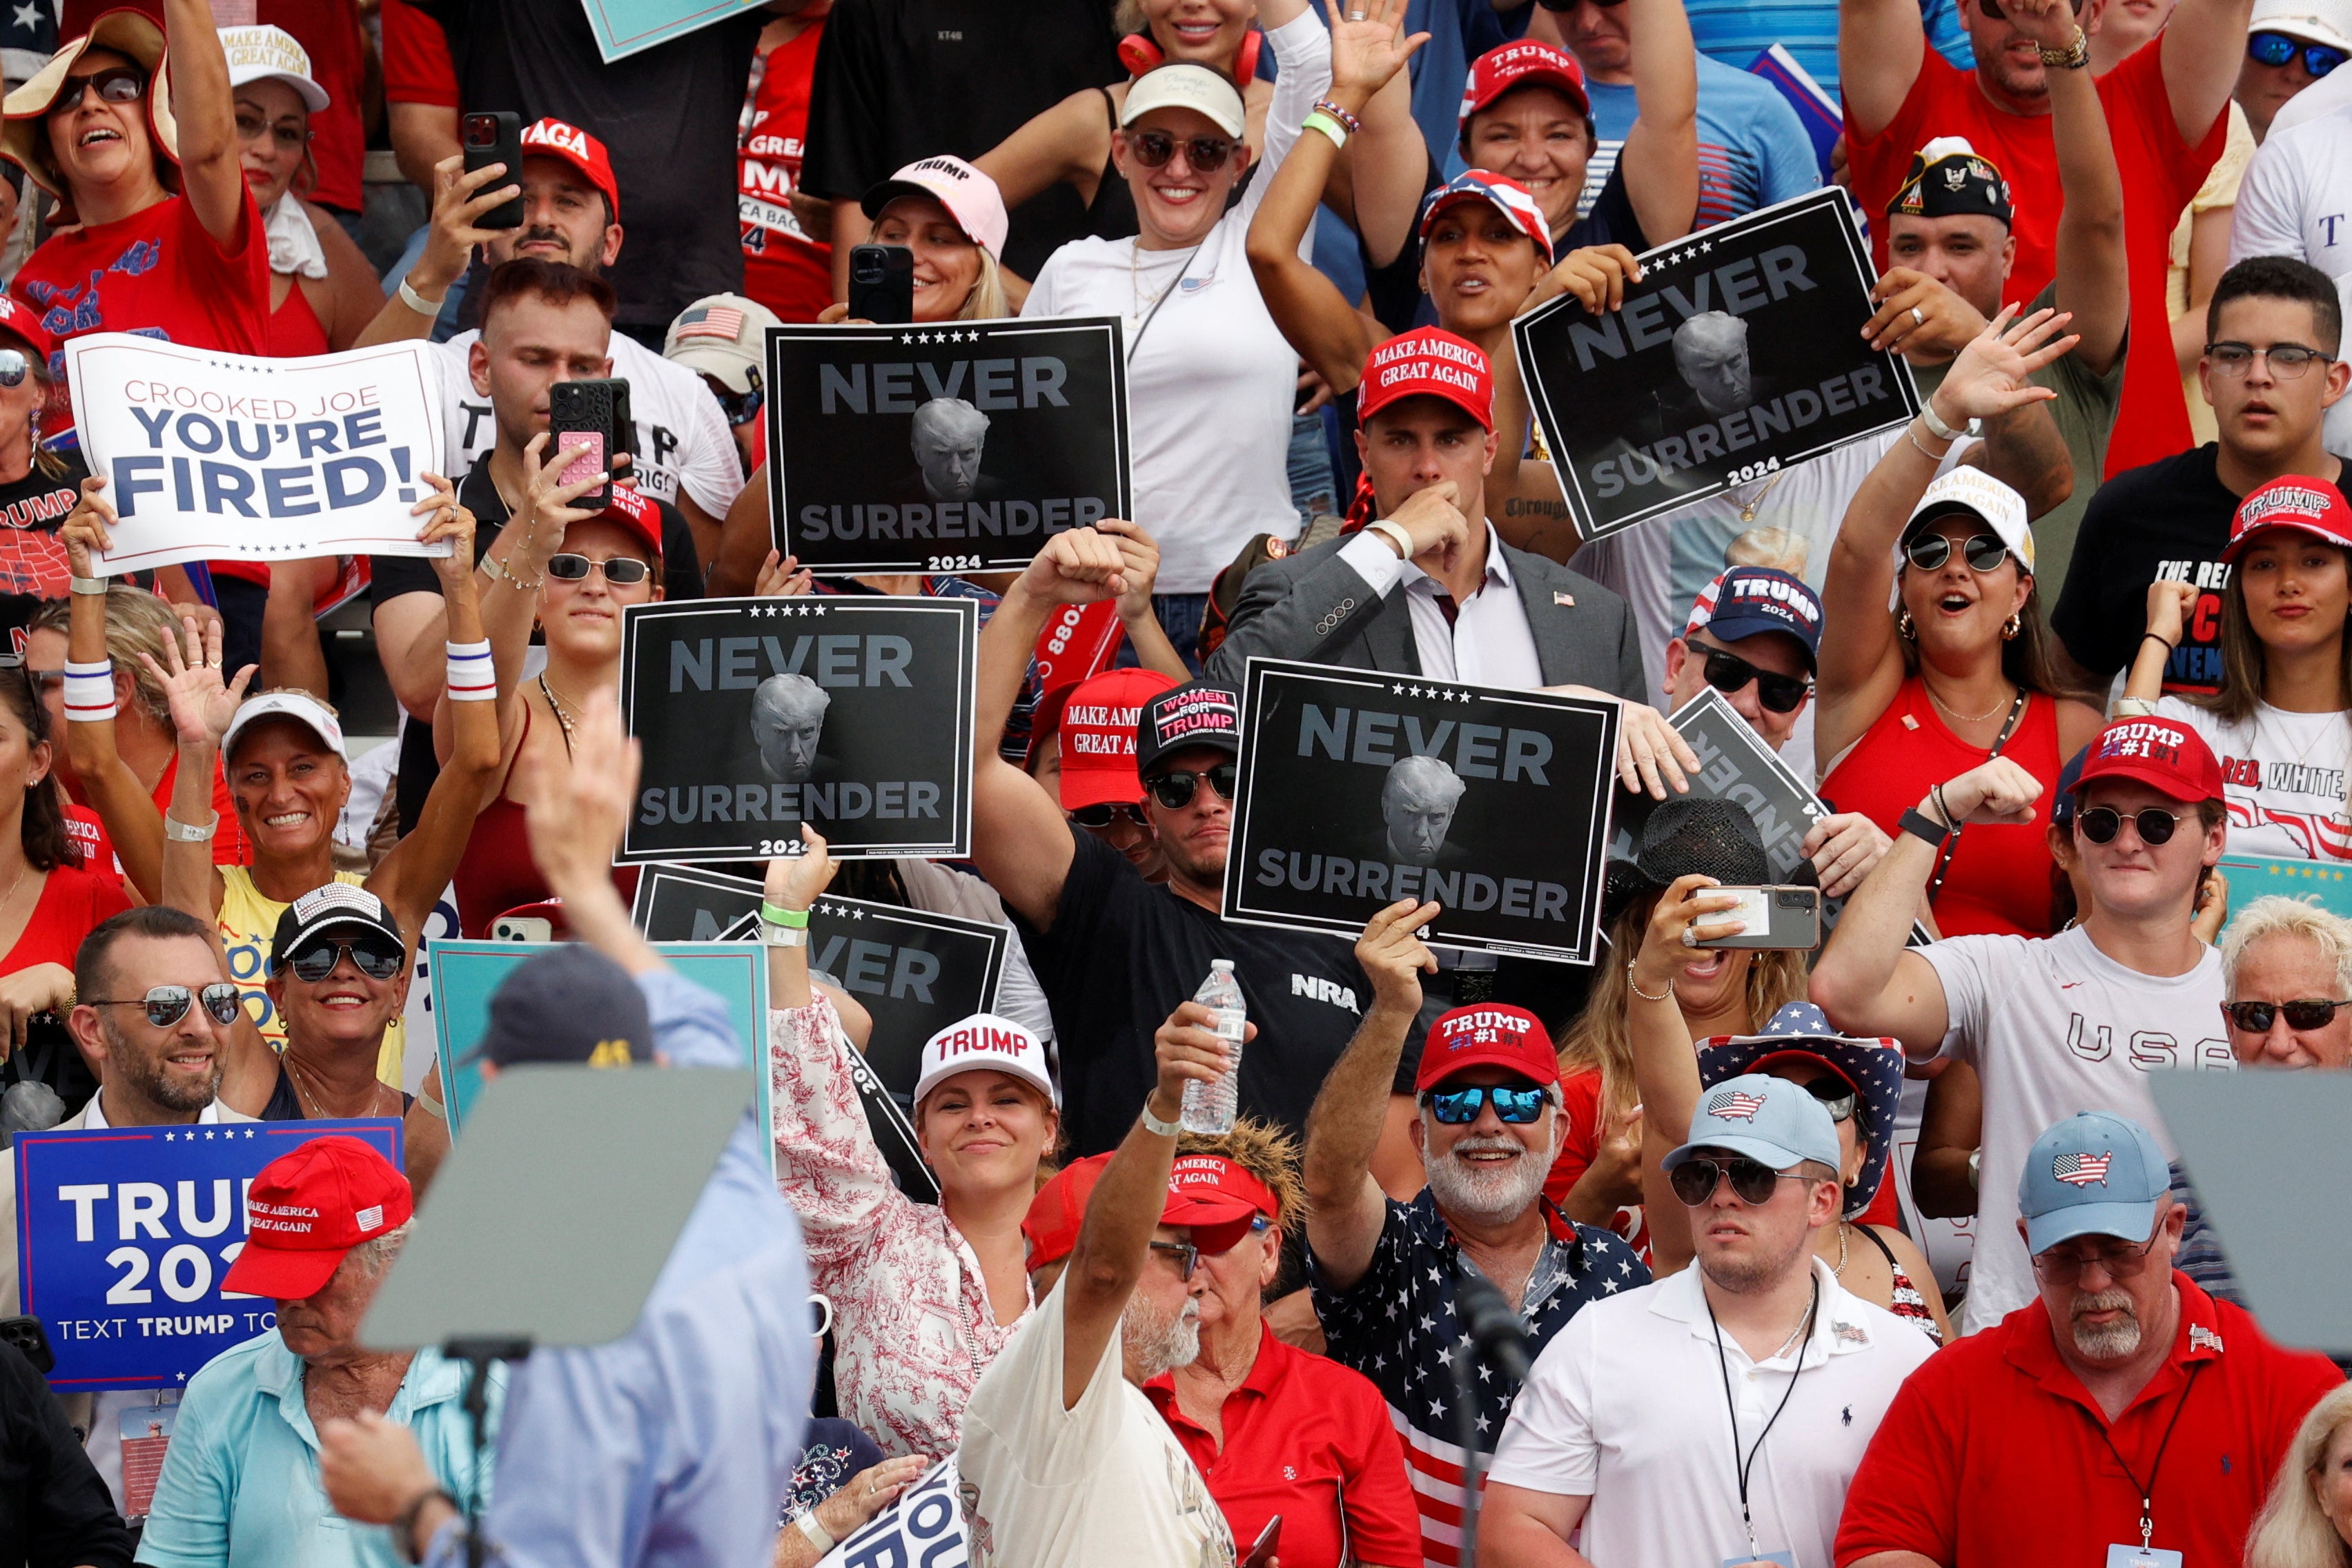 Large crowds gathered at the golf club in Florida, for Trump’s first major rally in more than a week